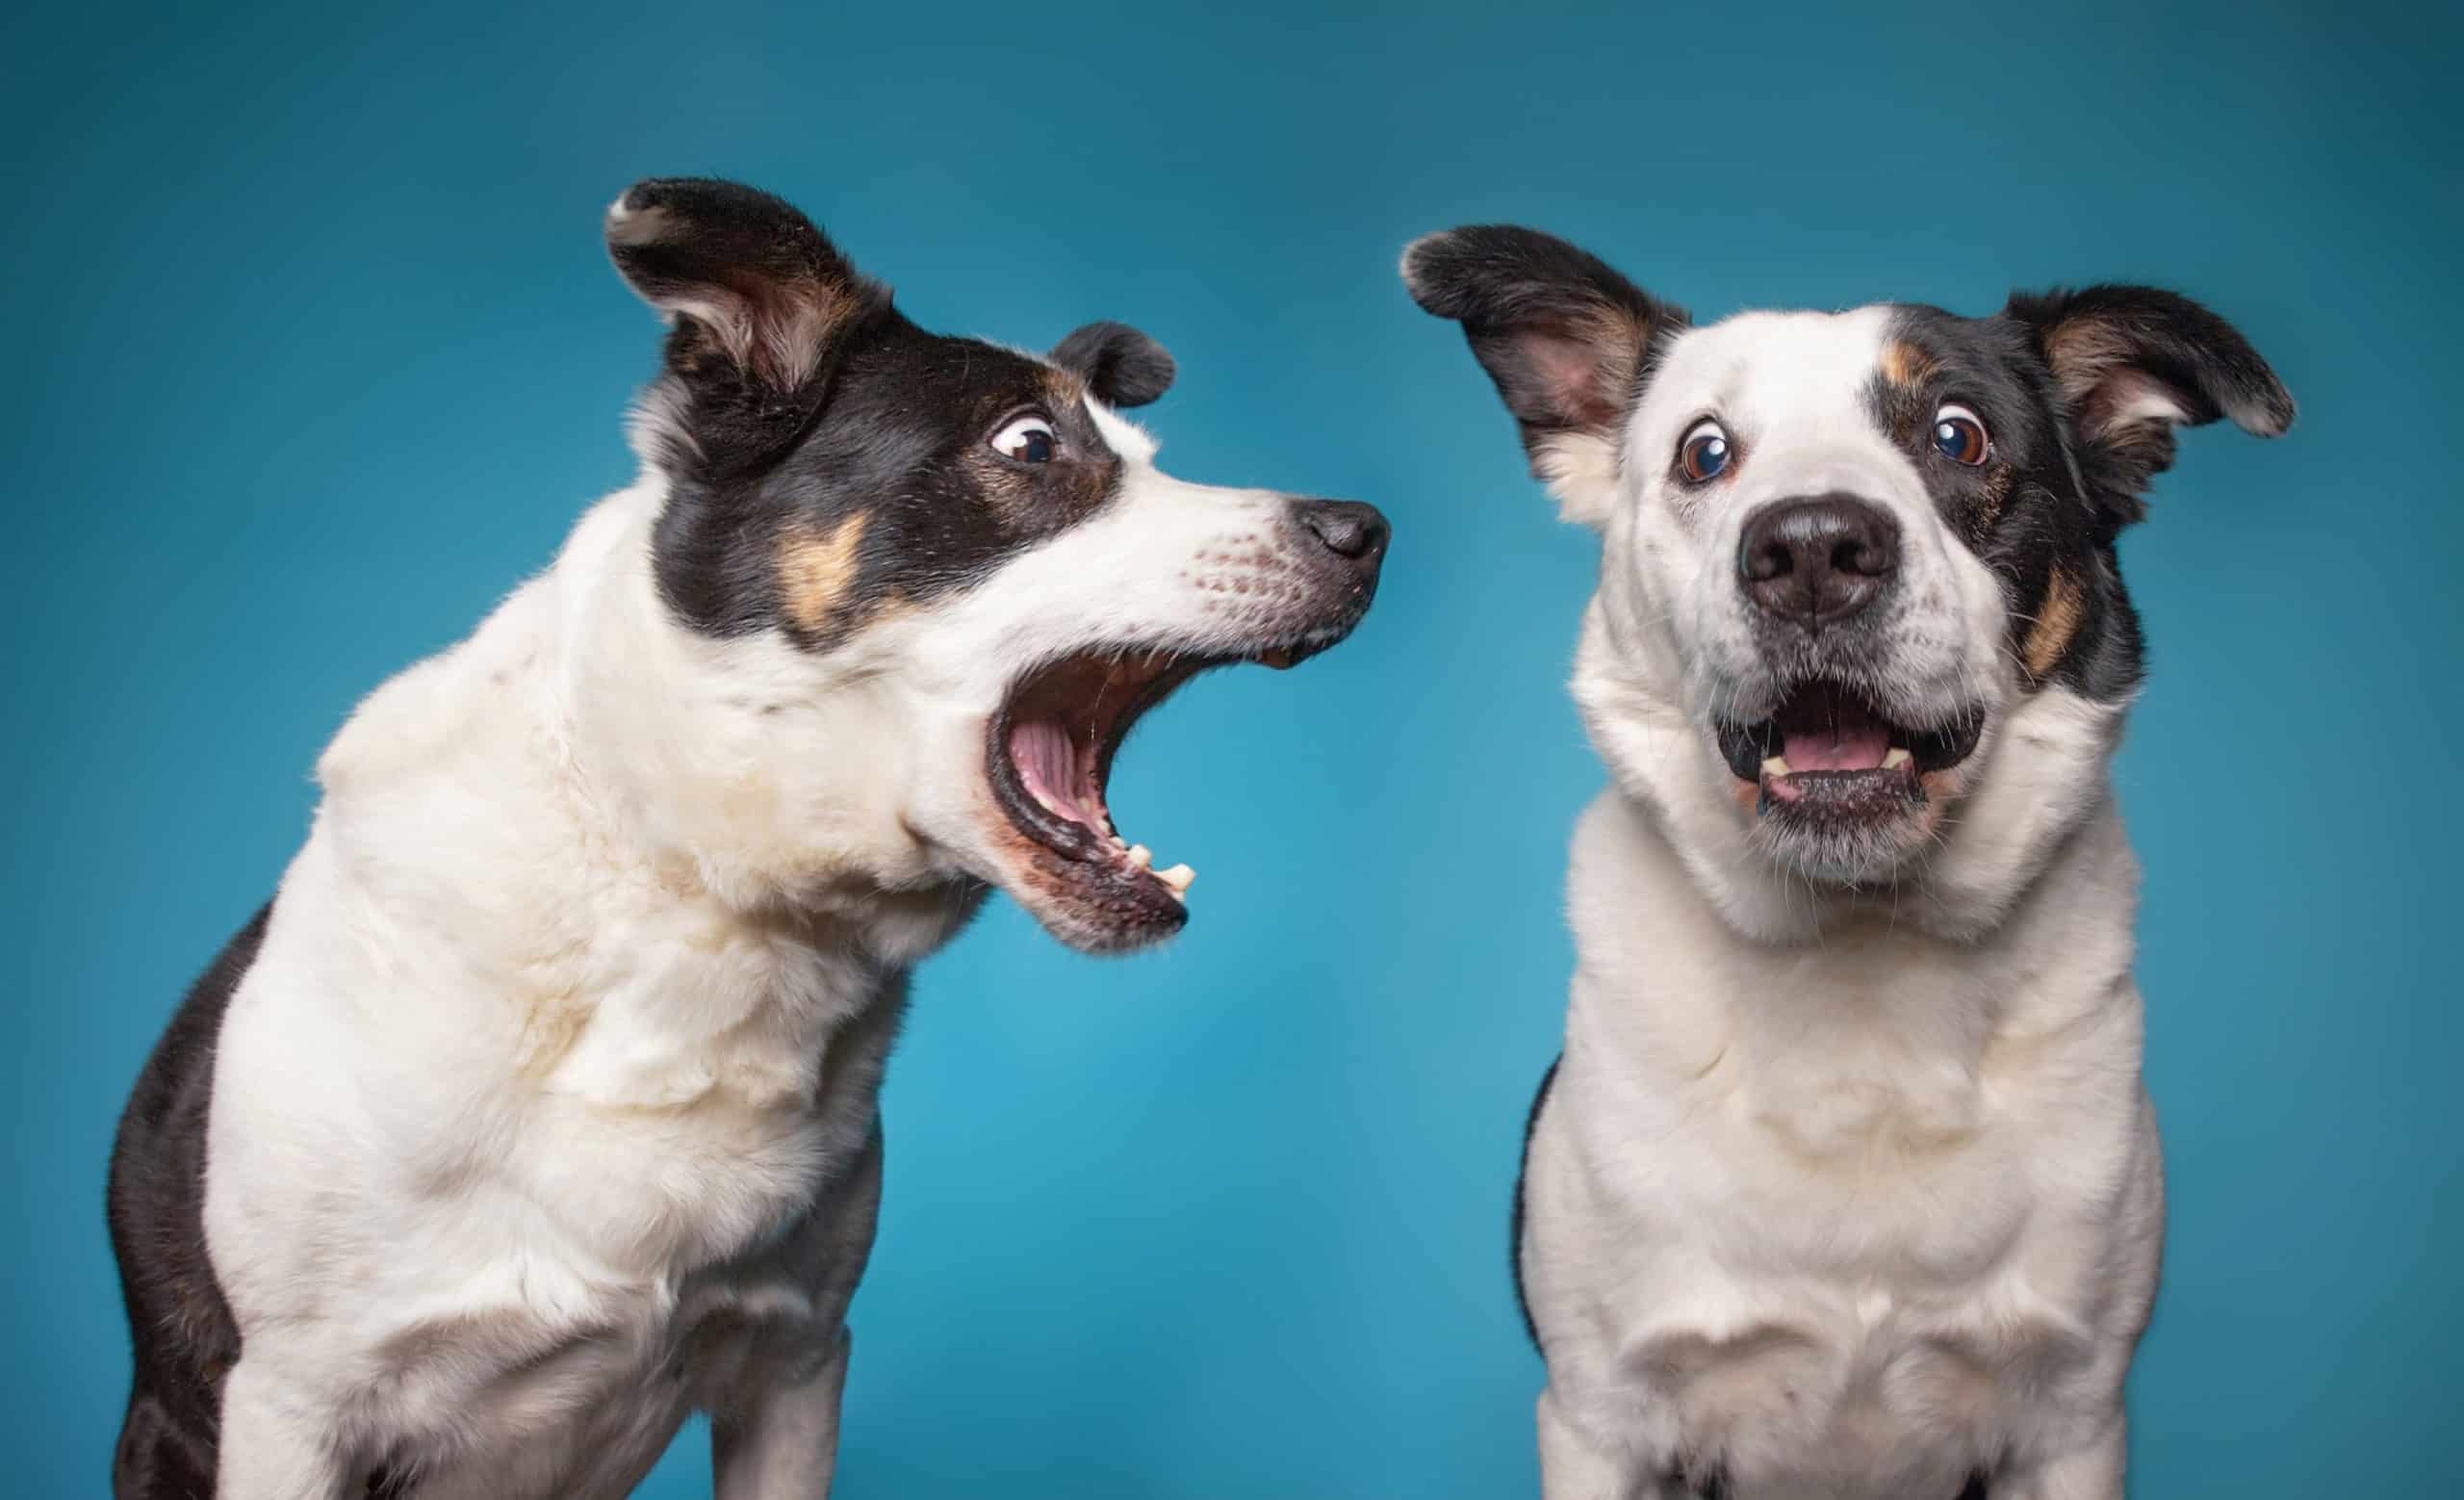 Do dogs learn bad habits from other dogs?